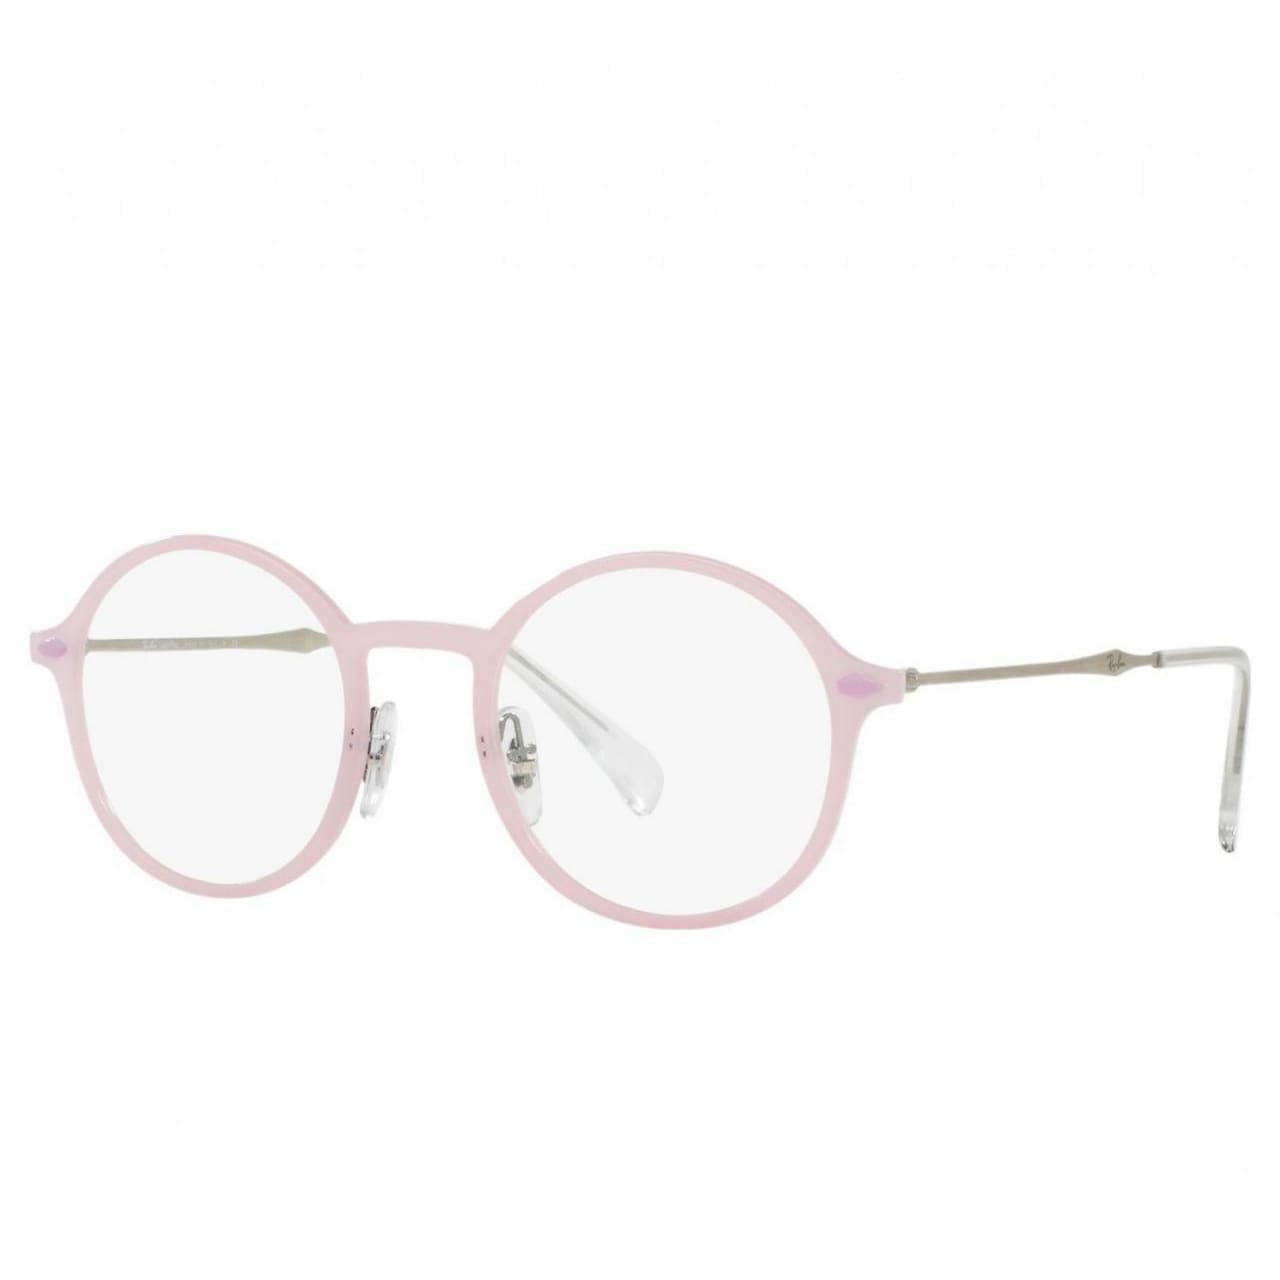 Ray-Ban RB7087 5639 Pink with Silver Full Rim LightRay Titanium Round Optical Frames 8053672603590